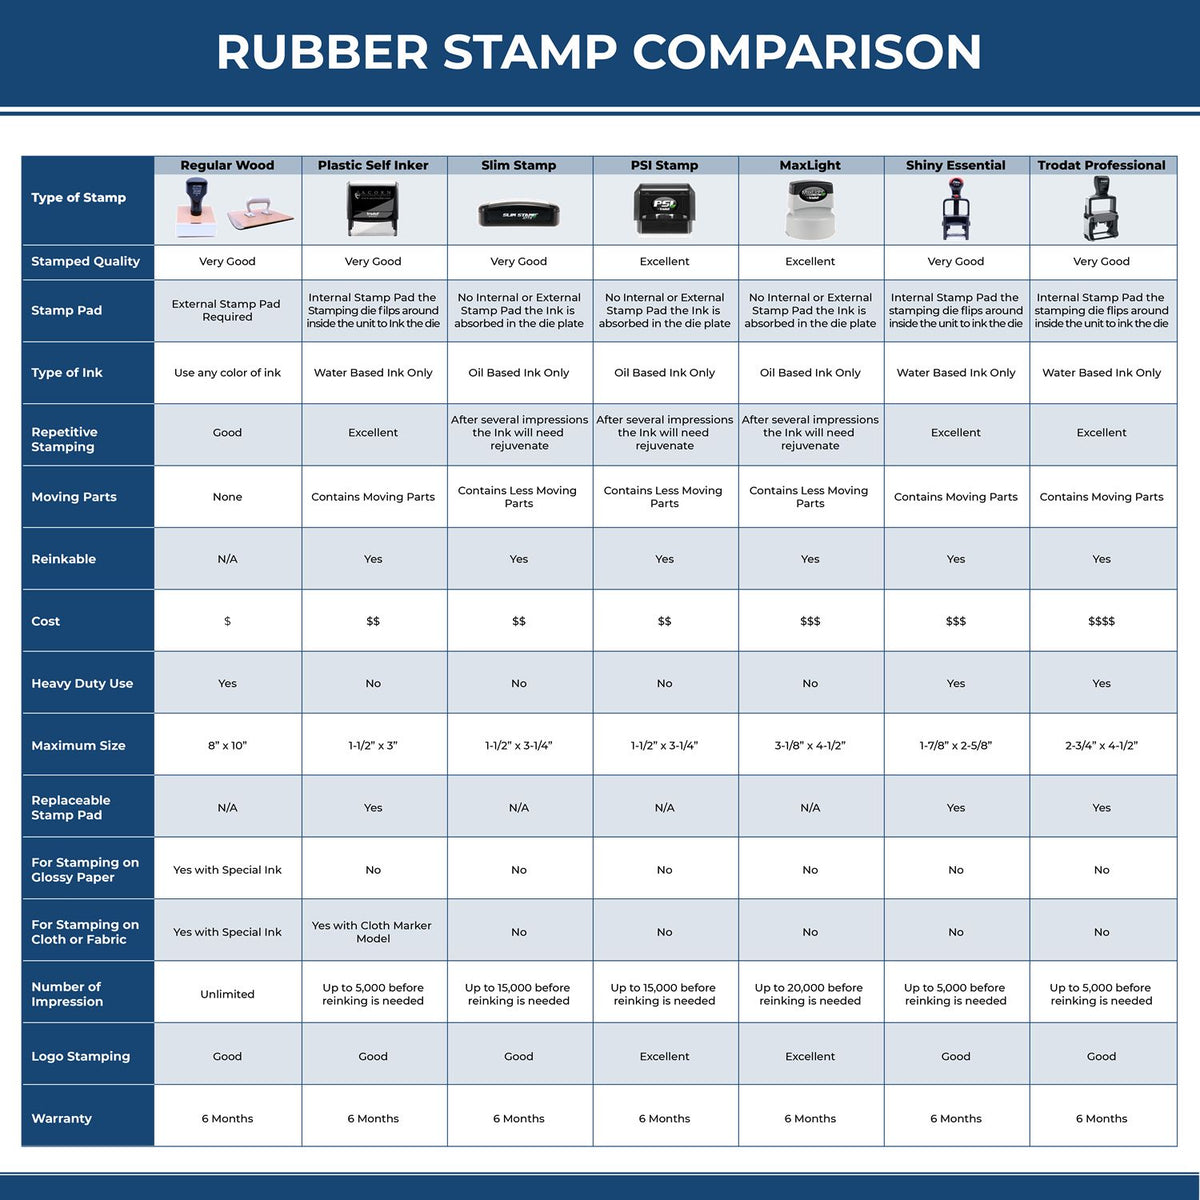 Large Self Inking Copy Stamp 4114S Rubber Stamp Comparison